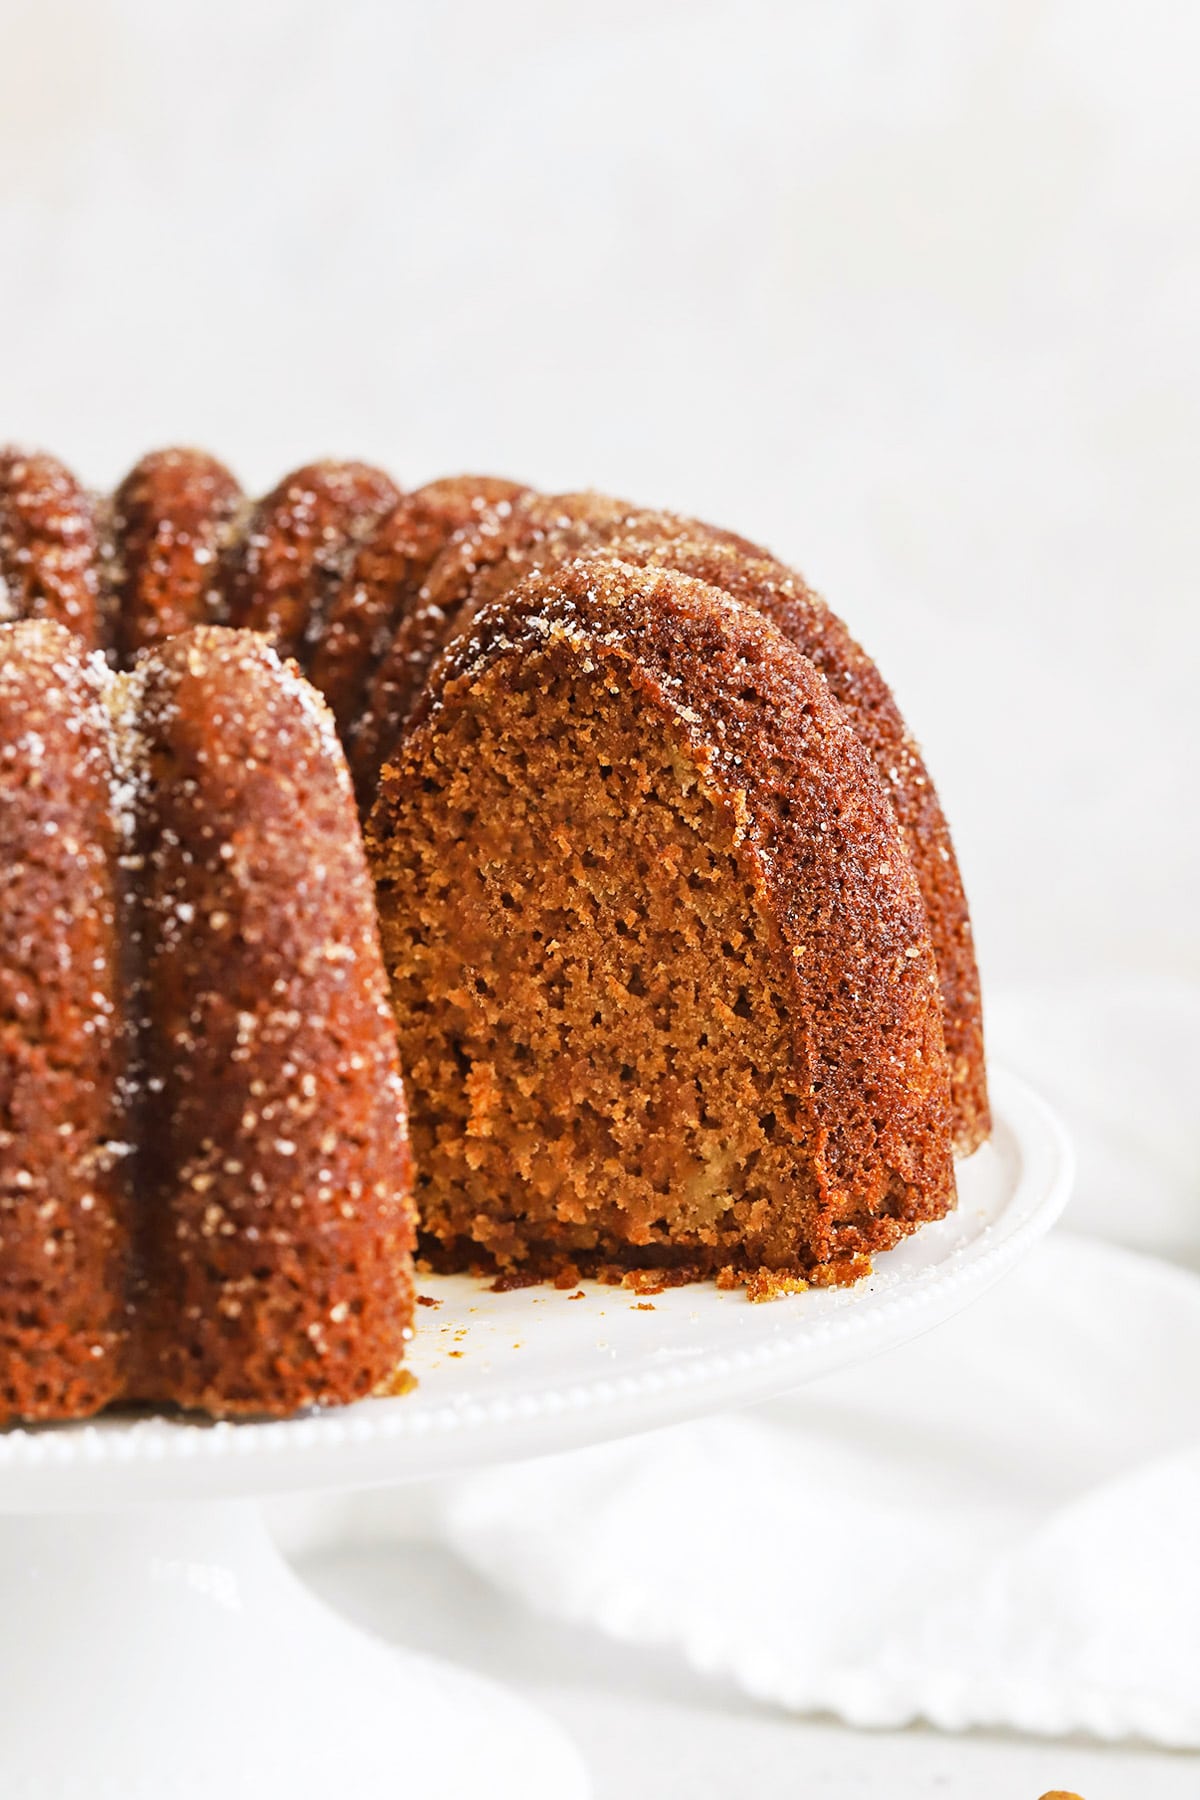 Gluten Free Apple Spice Bundt Cake with a slice cut out, revealing a gorgeous tender center